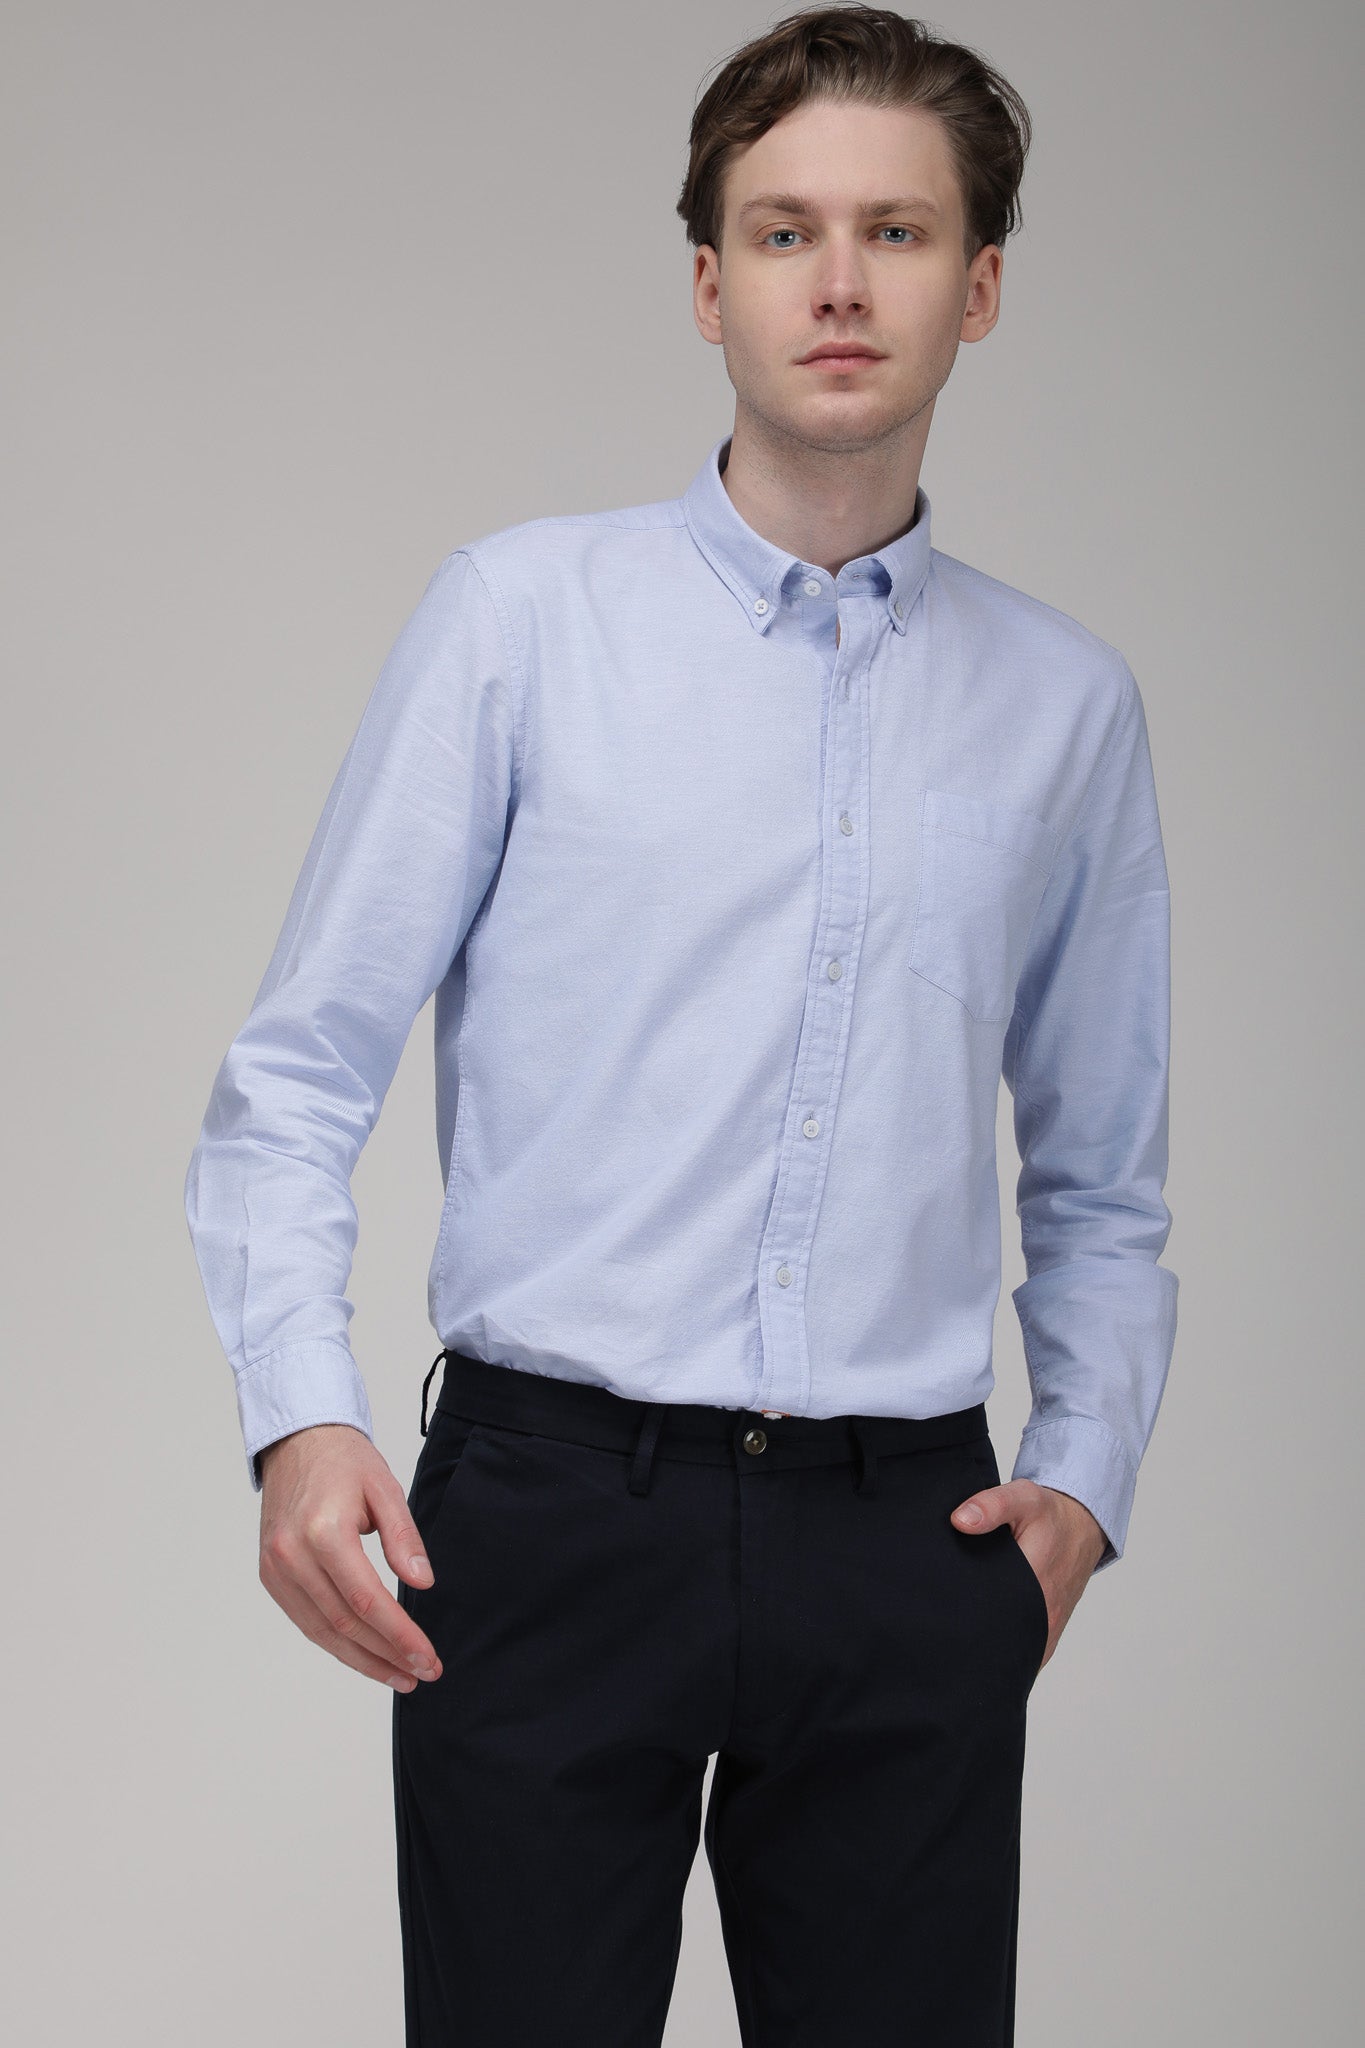 Bare Brown Solid Cotton Oxford Shirt, Slim Fit with Full Sleeves - Sky Blue